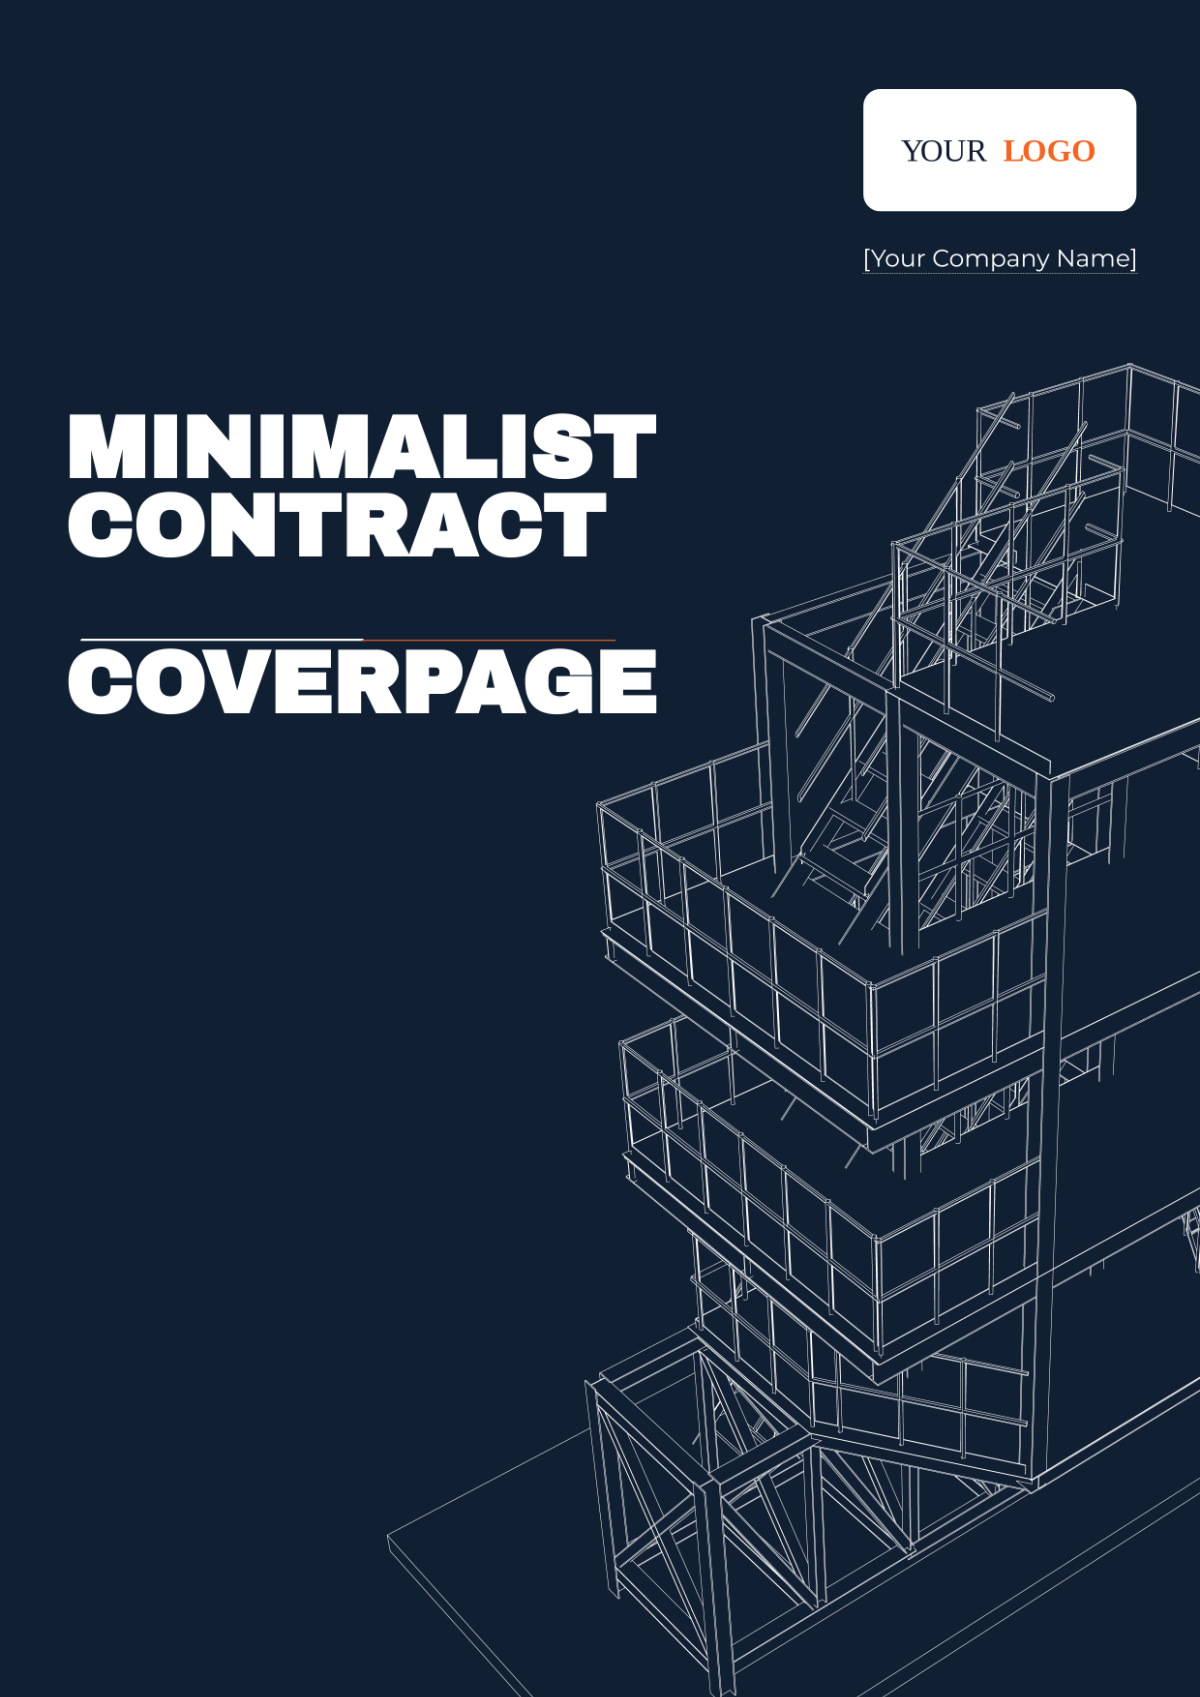 Minimalist Contract Cover Page Template